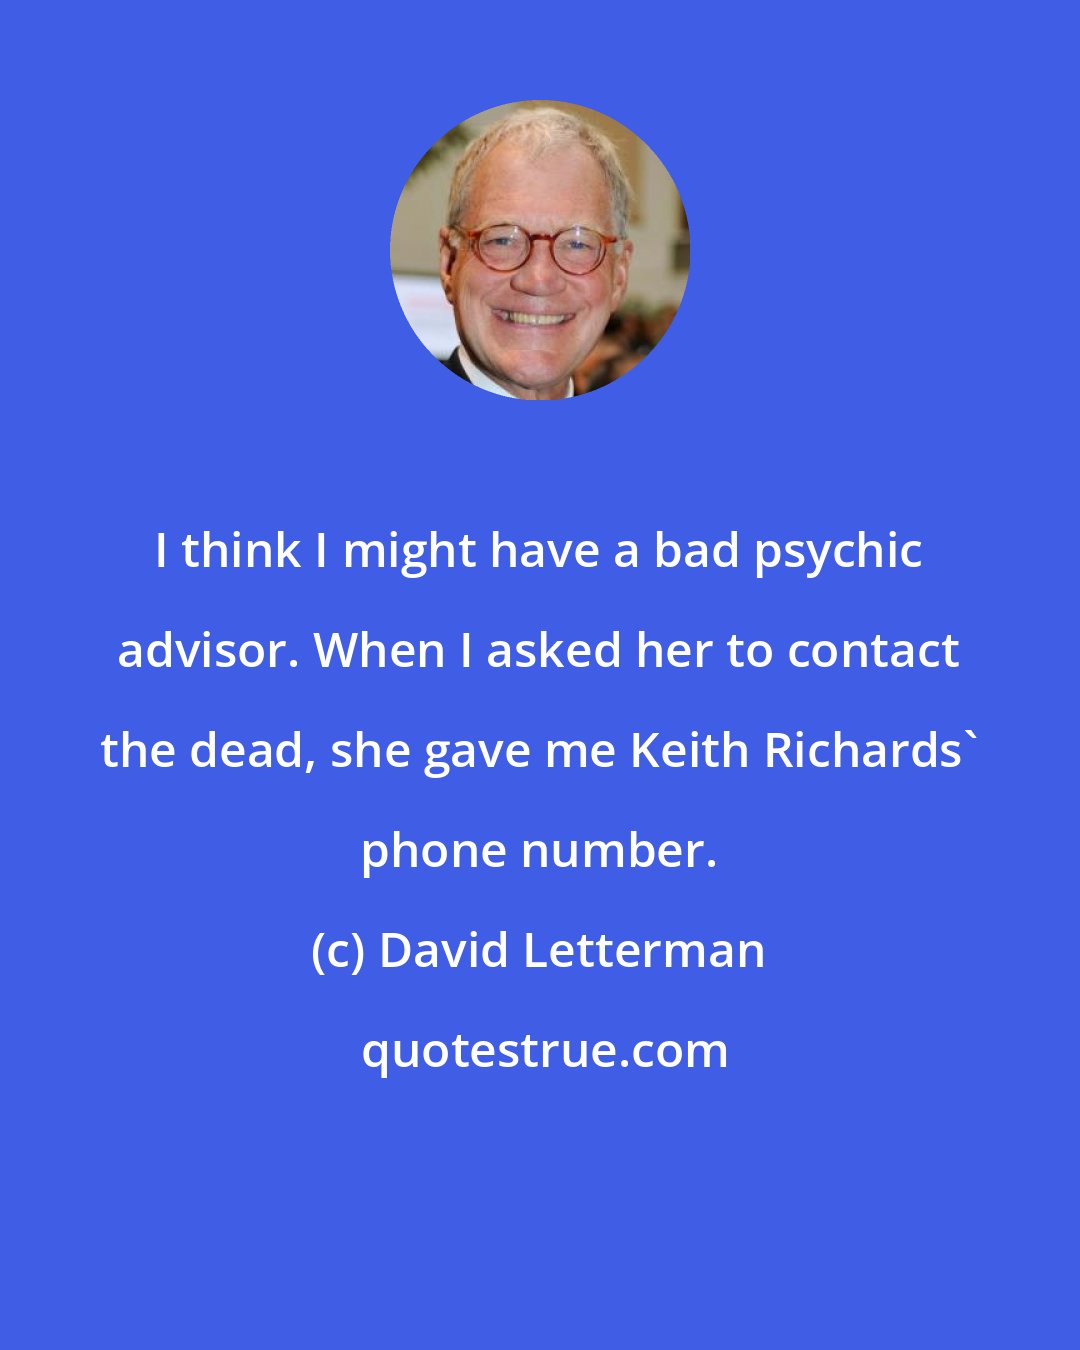 David Letterman: I think I might have a bad psychic advisor. When I asked her to contact the dead, she gave me Keith Richards' phone number.